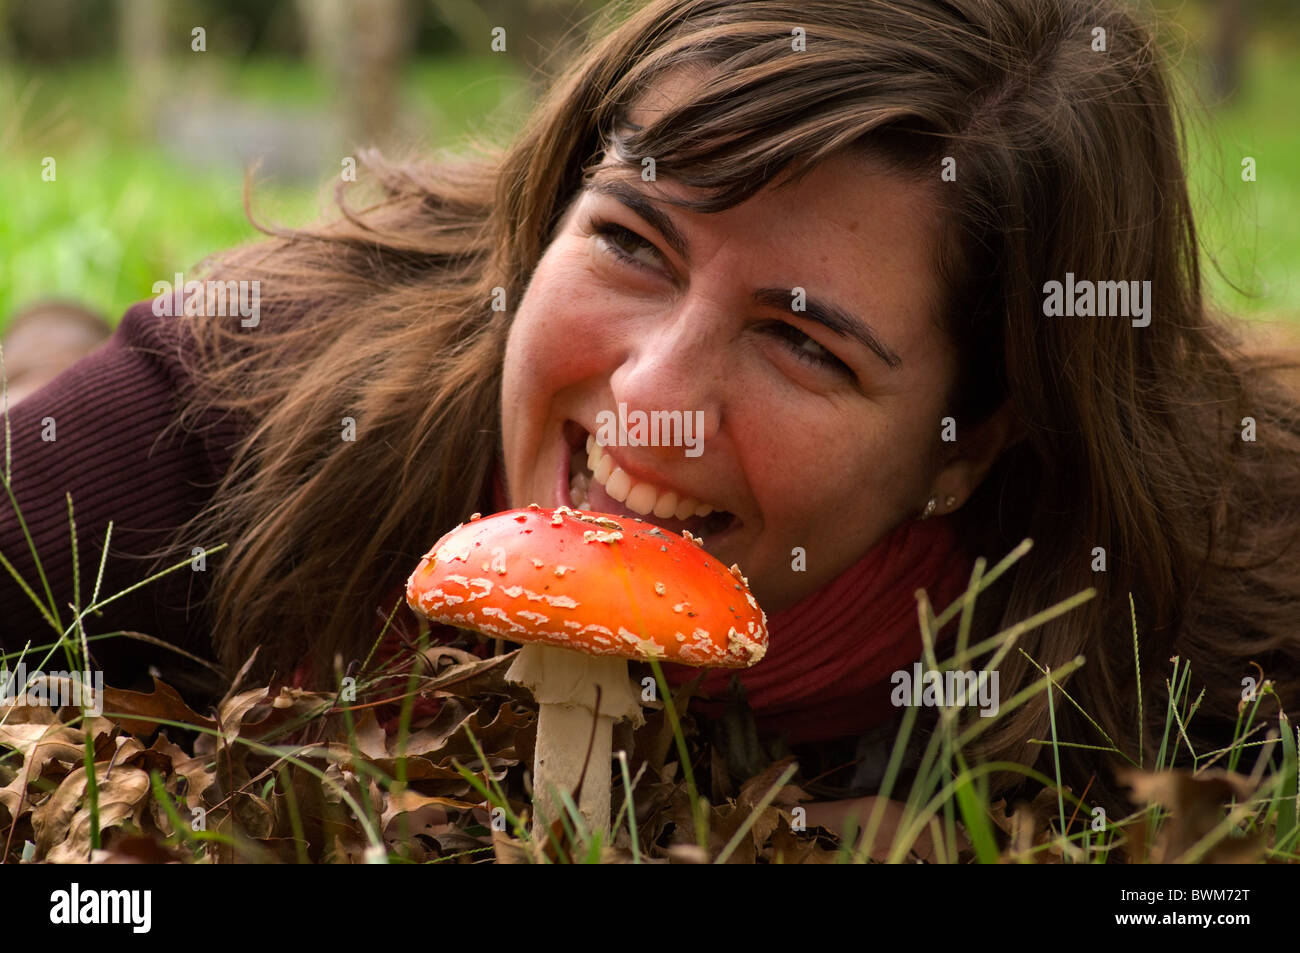 girl simulating that is going to eat a poison red mushroom Stock Photo